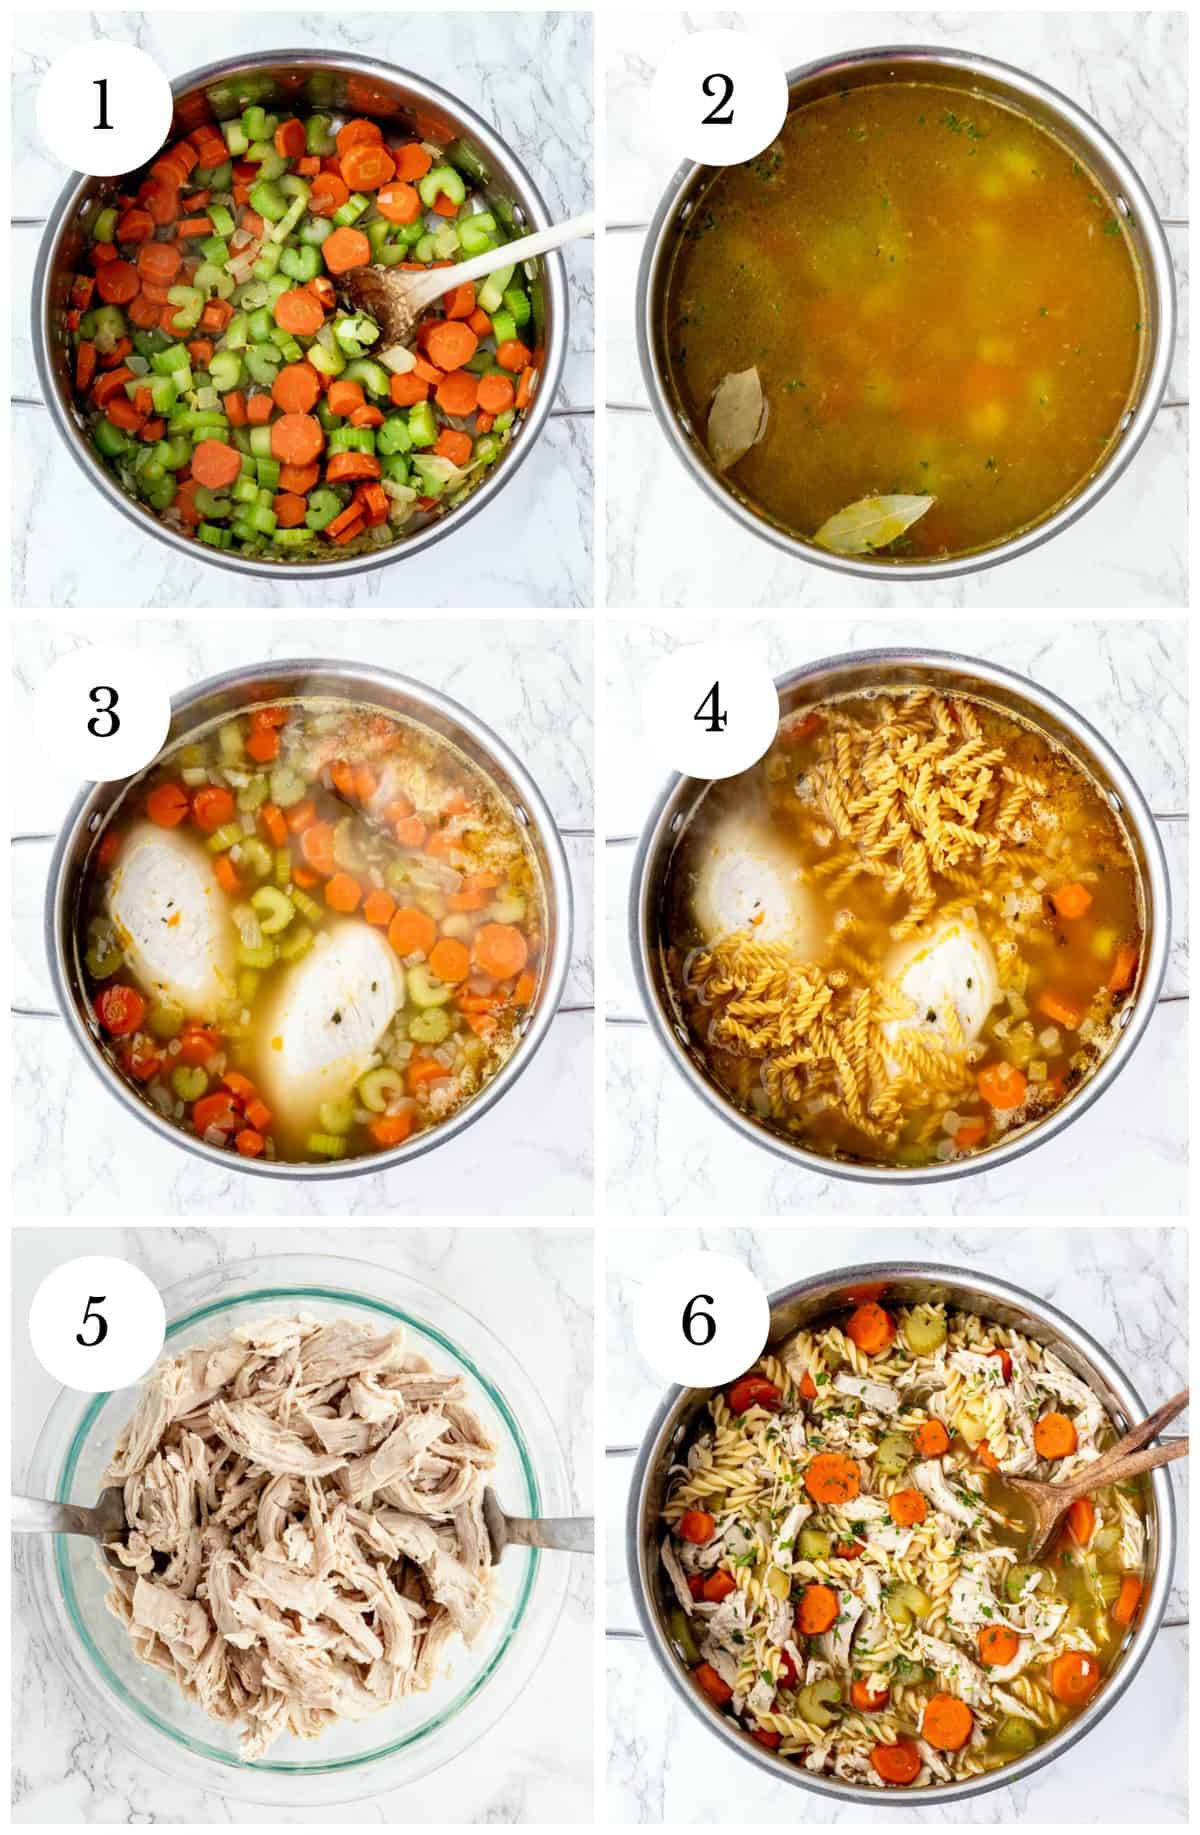 Step by step photos for making homemade chicken noodle soup.